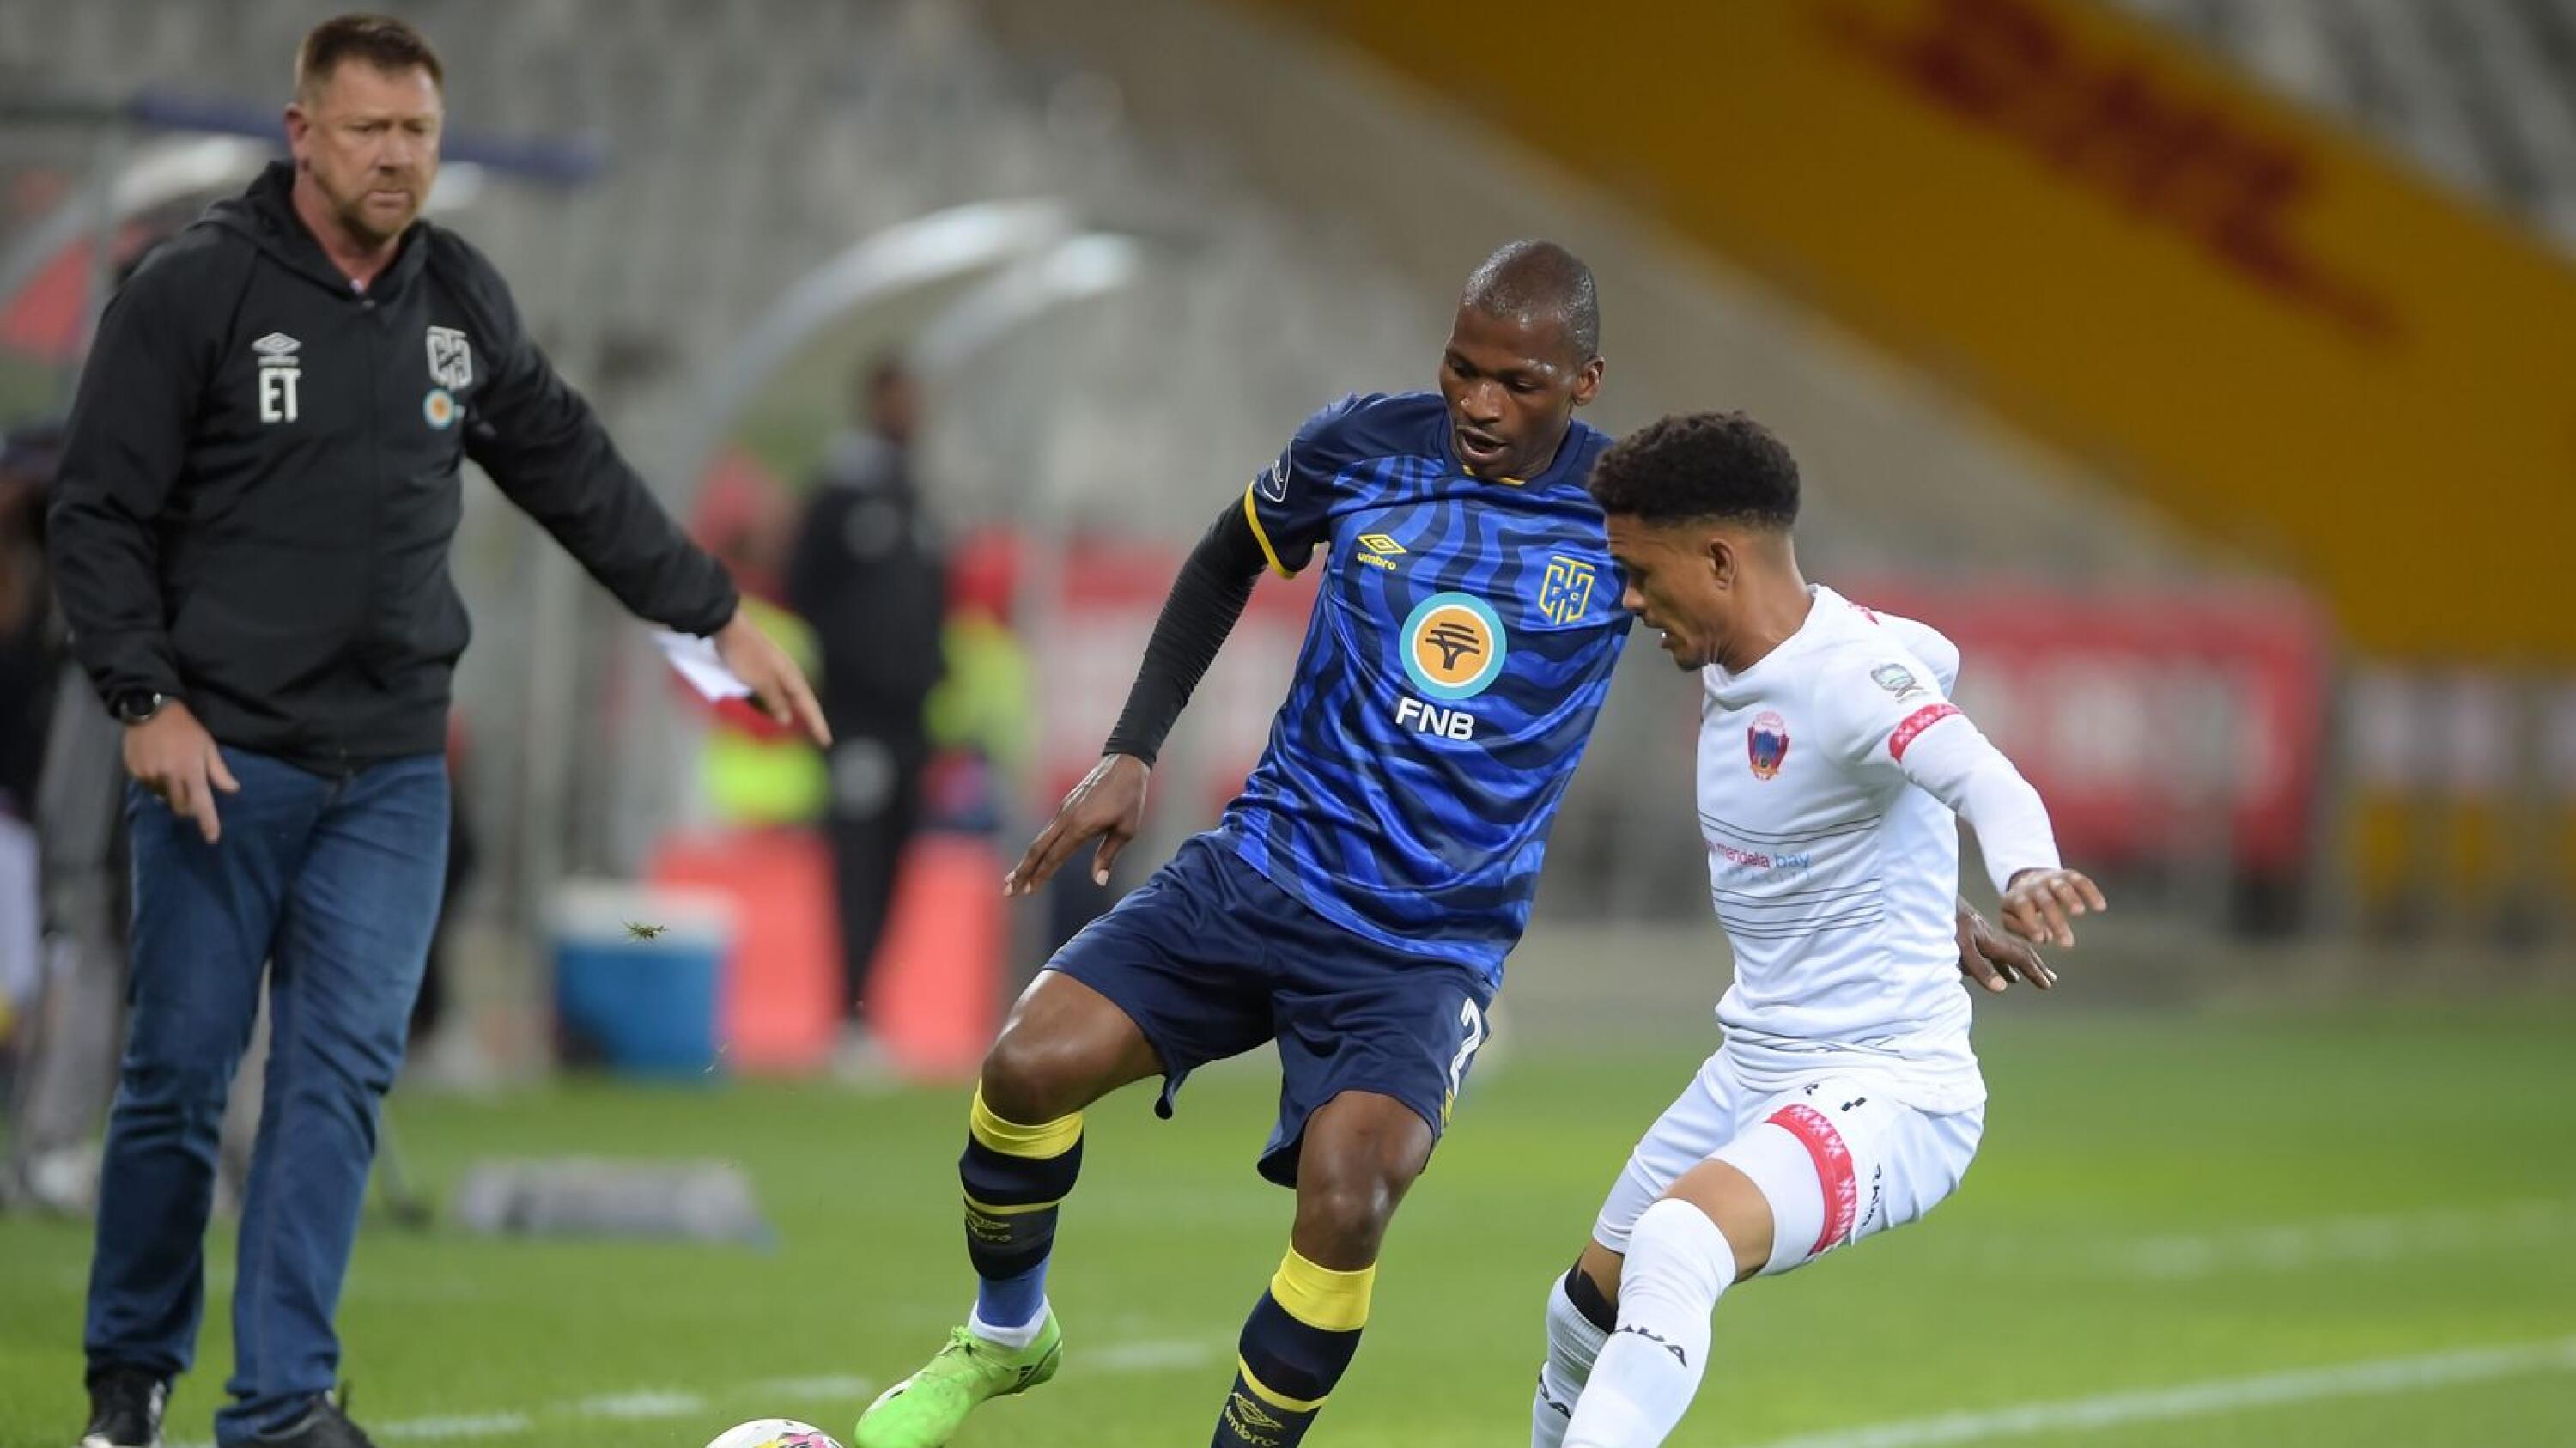 Cape Town City’s Thamsanqa Mkhize control the ball as Chippa United’s Ronaldo Maarman makes the challenge during their DStv Premiership clash at Cape Town Stadium on Tuesday